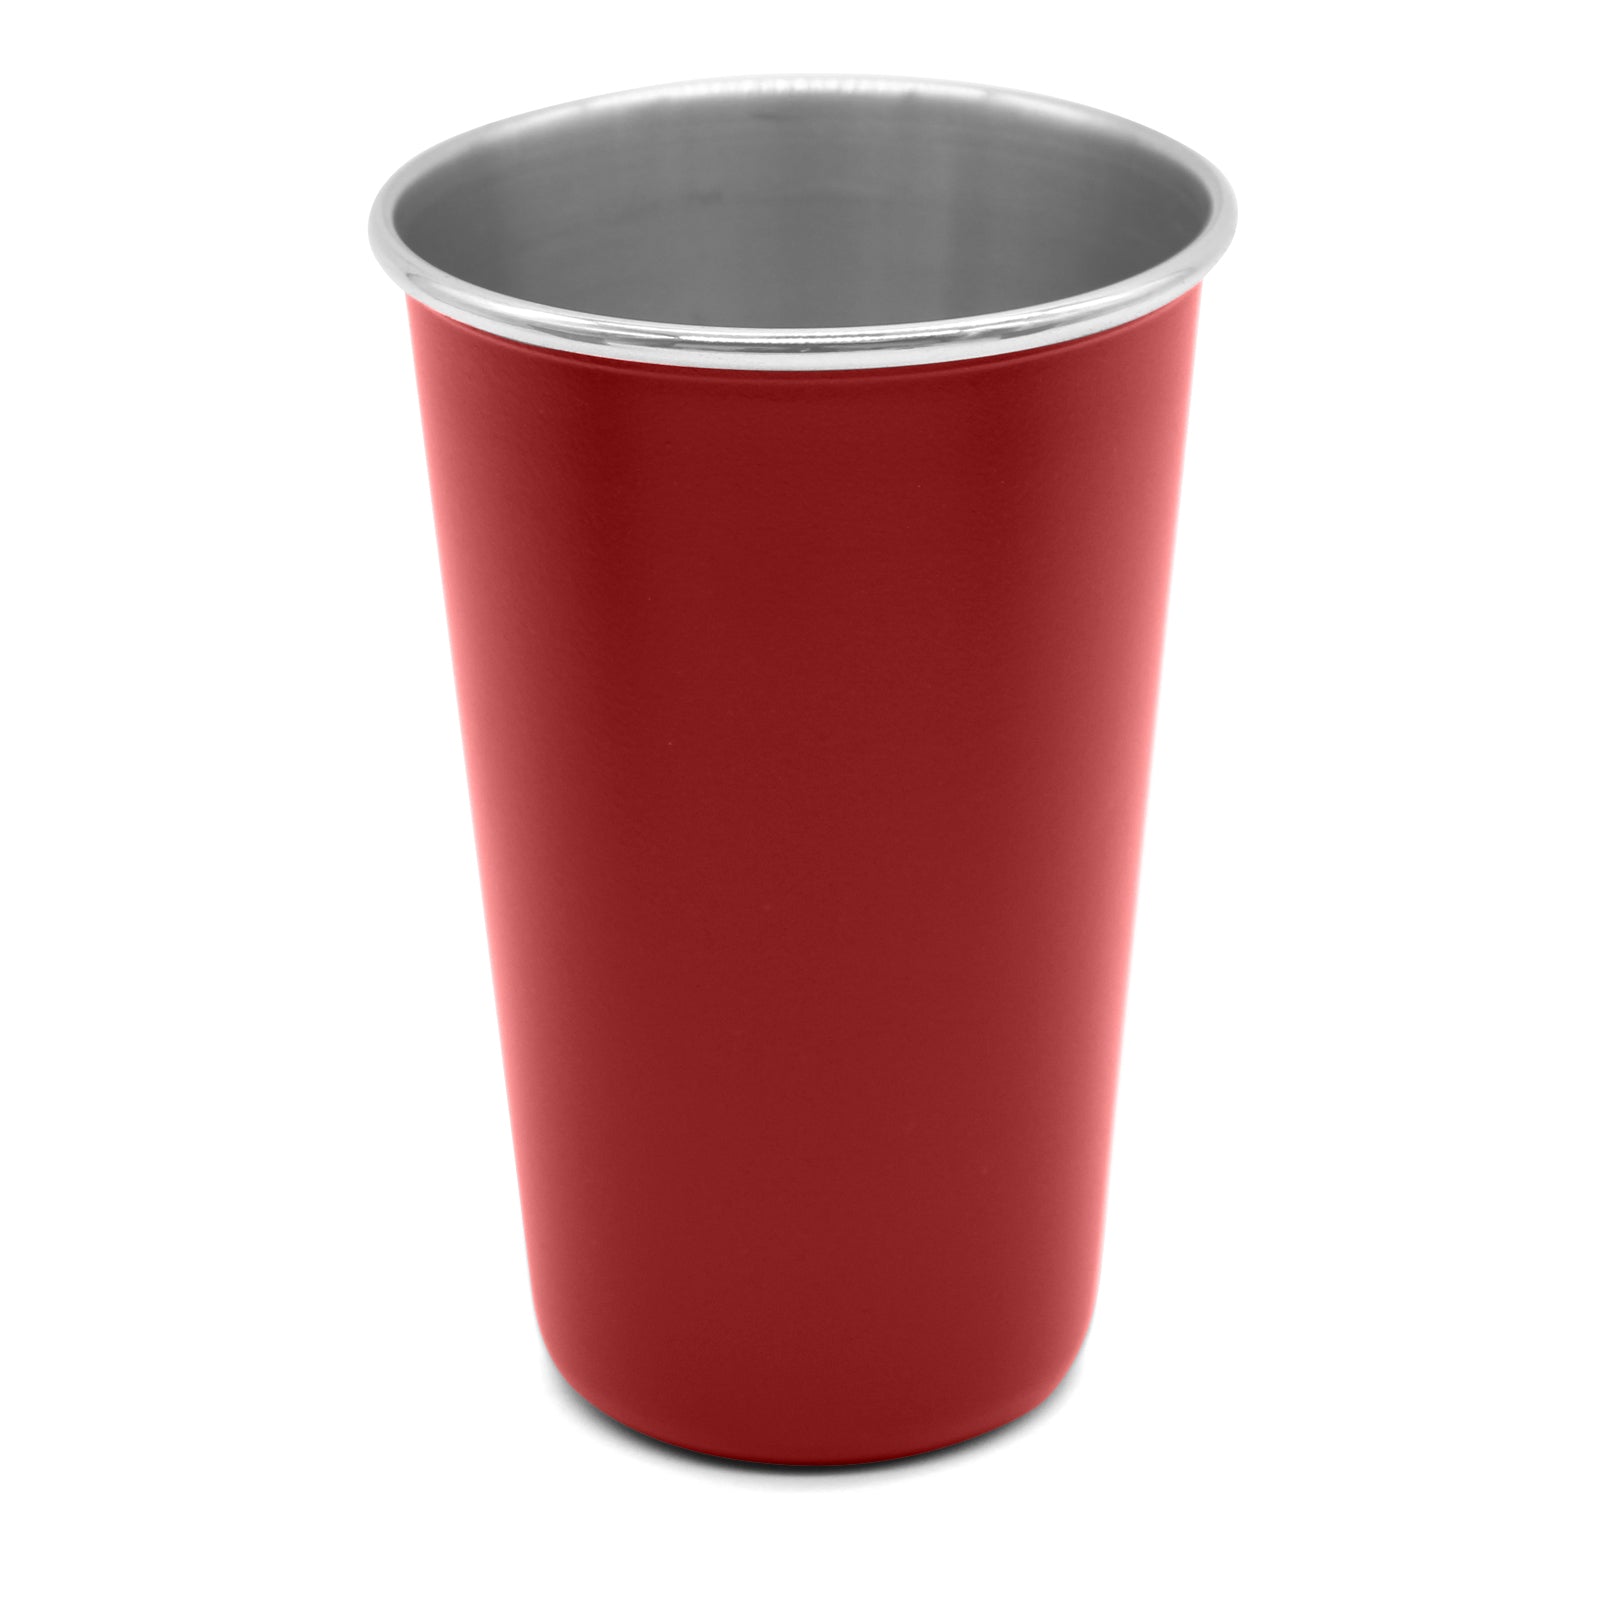 Stainless Steel Red Tumbler Cup for Camping and Fishing